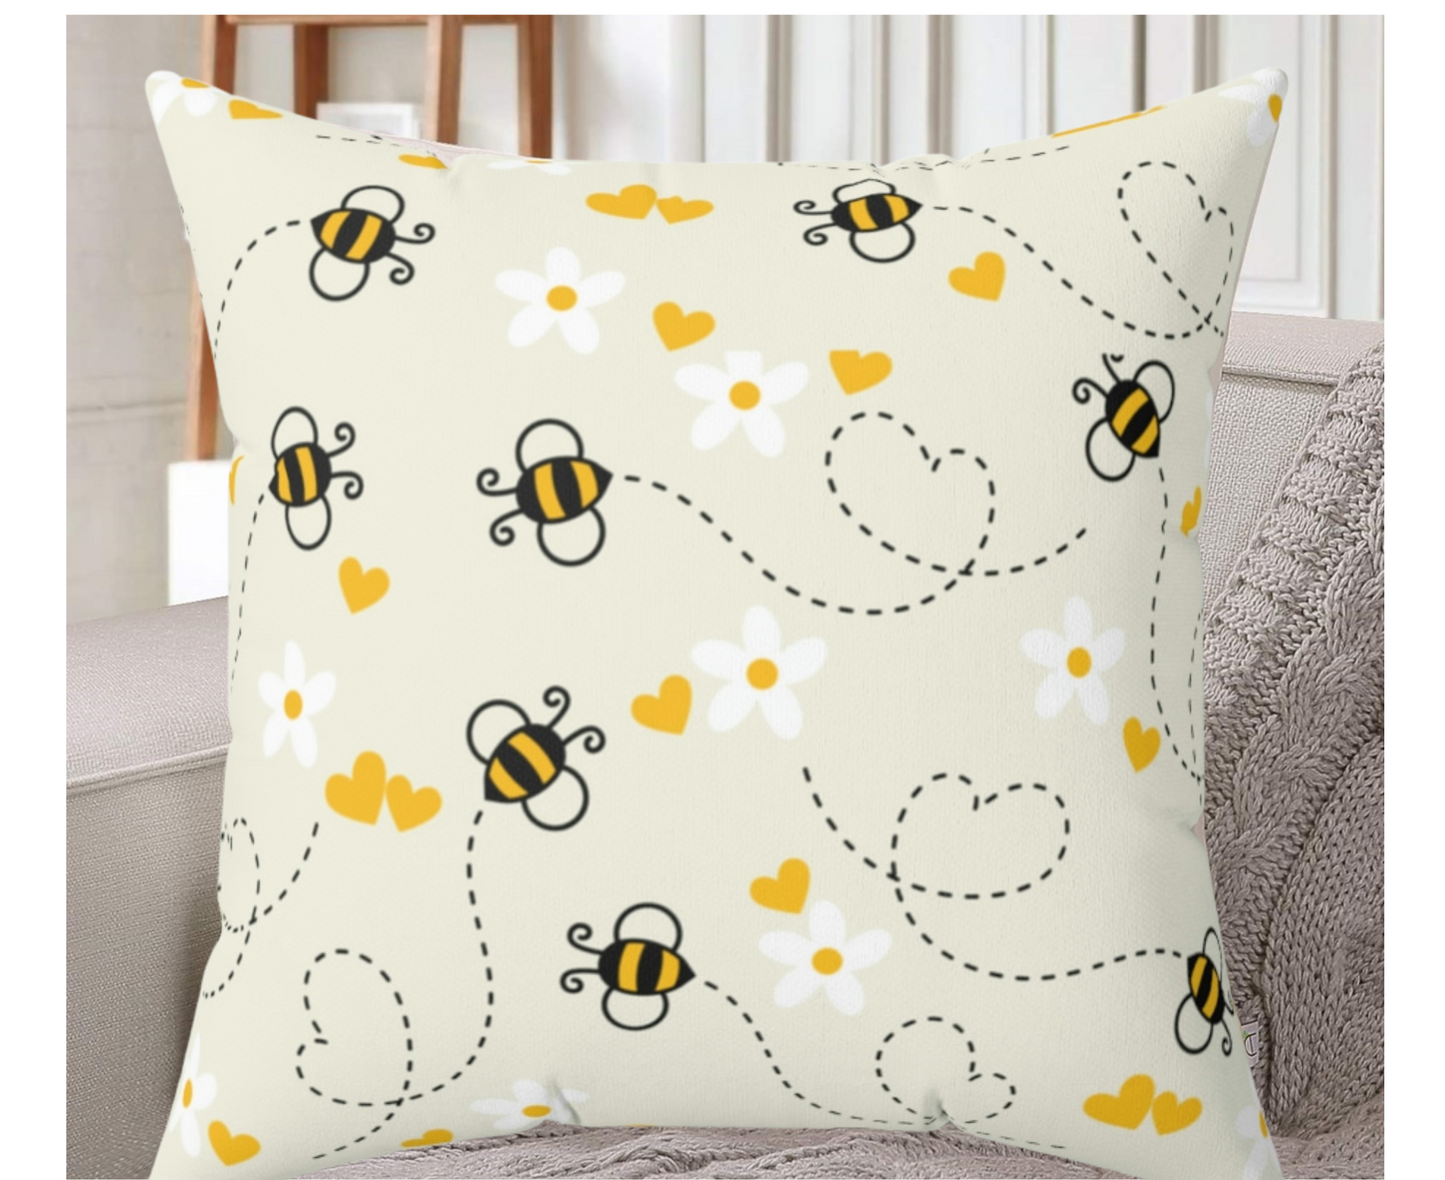 honey bee pillow with yellow bee, hearts and daisy print